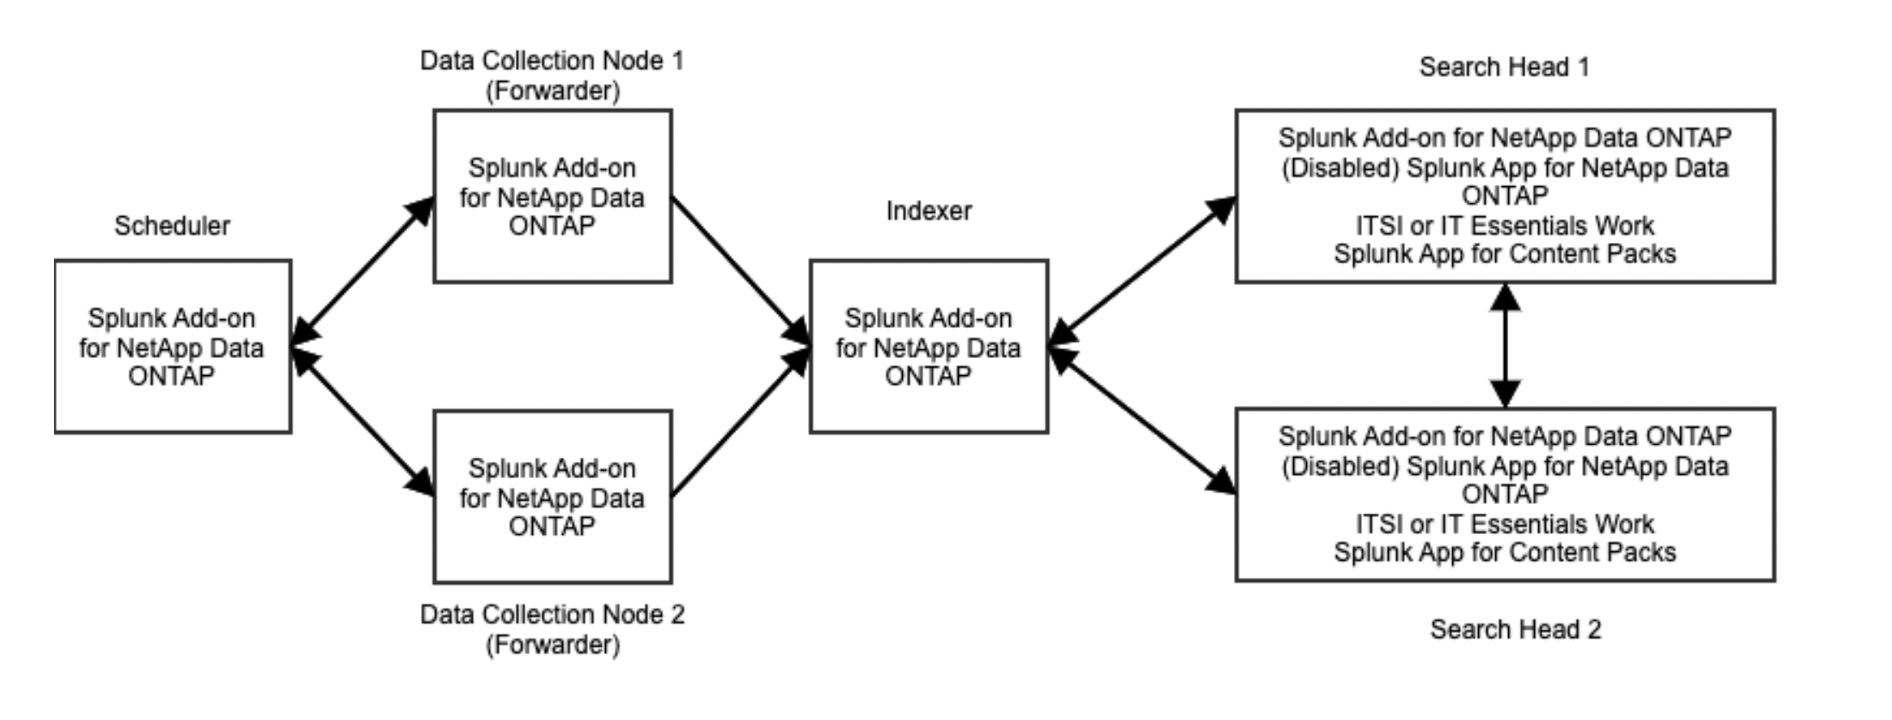 This image is a diagram of a post-migration to the content pack deployment. A series of connected boxes represent different parts of a deployment and include the Scheduler, Indexer, and Search Heads. Review the table that follows for more info.